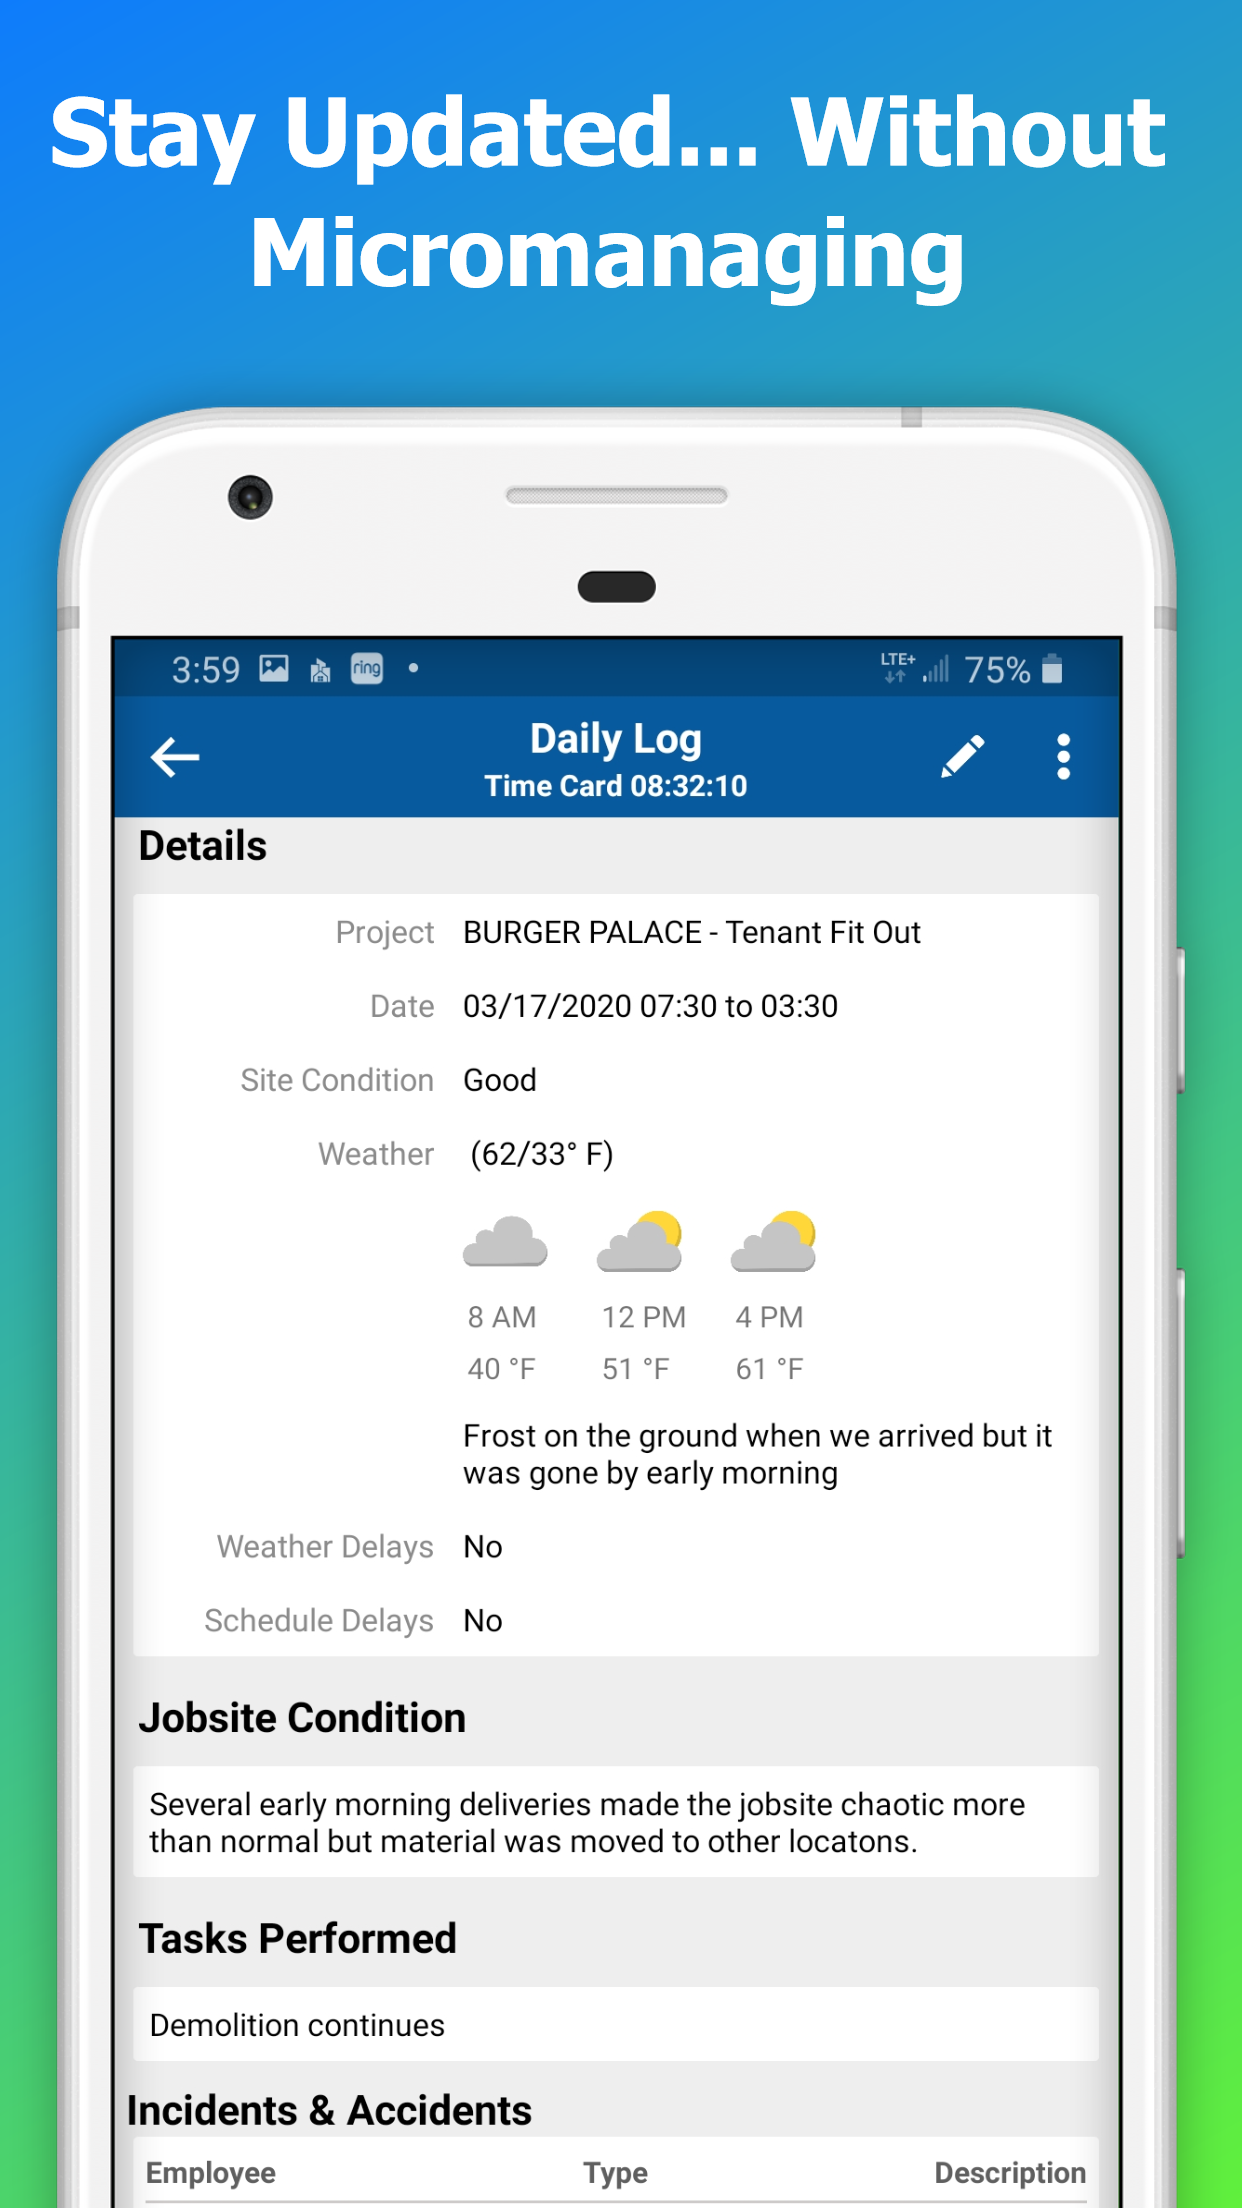 Contractor Foreman Software - Daily Logs allow your employees to create a work log of the jobsite, the work they performed, any issues, and who was where and when.  Stay informed - even when you are not around to ask.